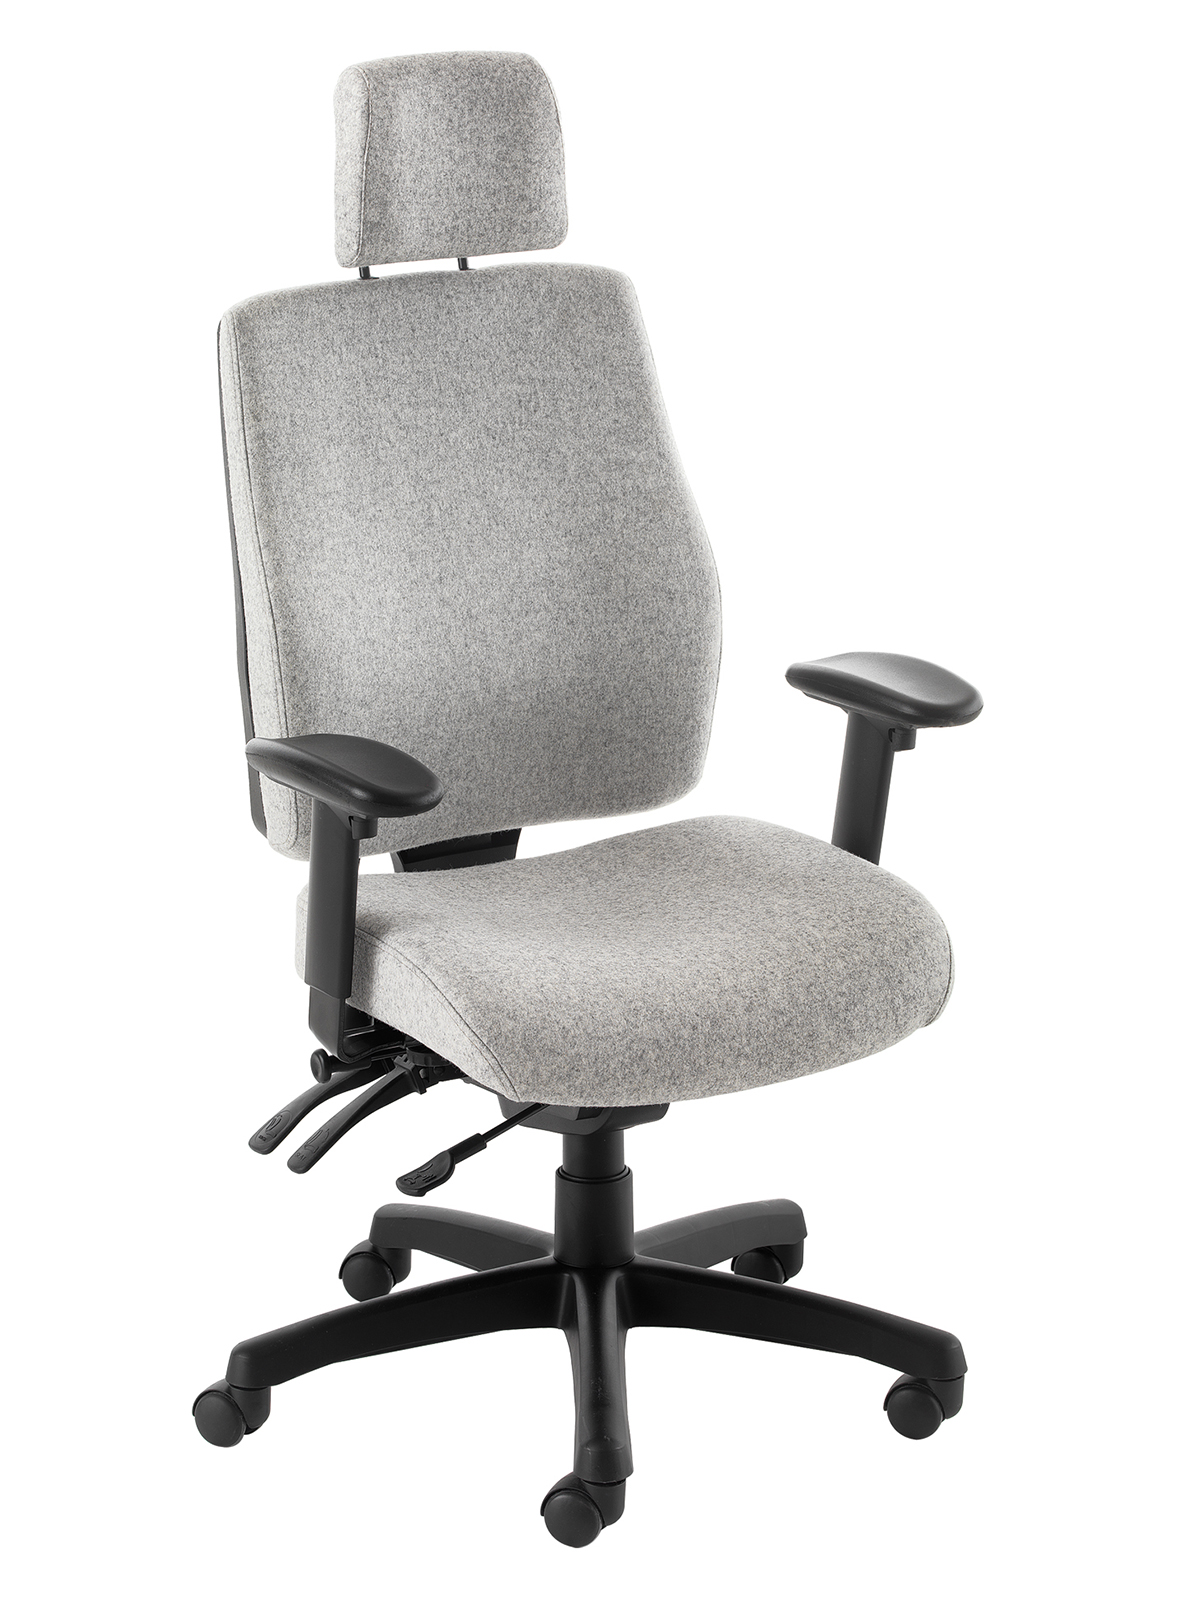 PSI HIGH BACK POSTURE CHAIR WITH ARMS